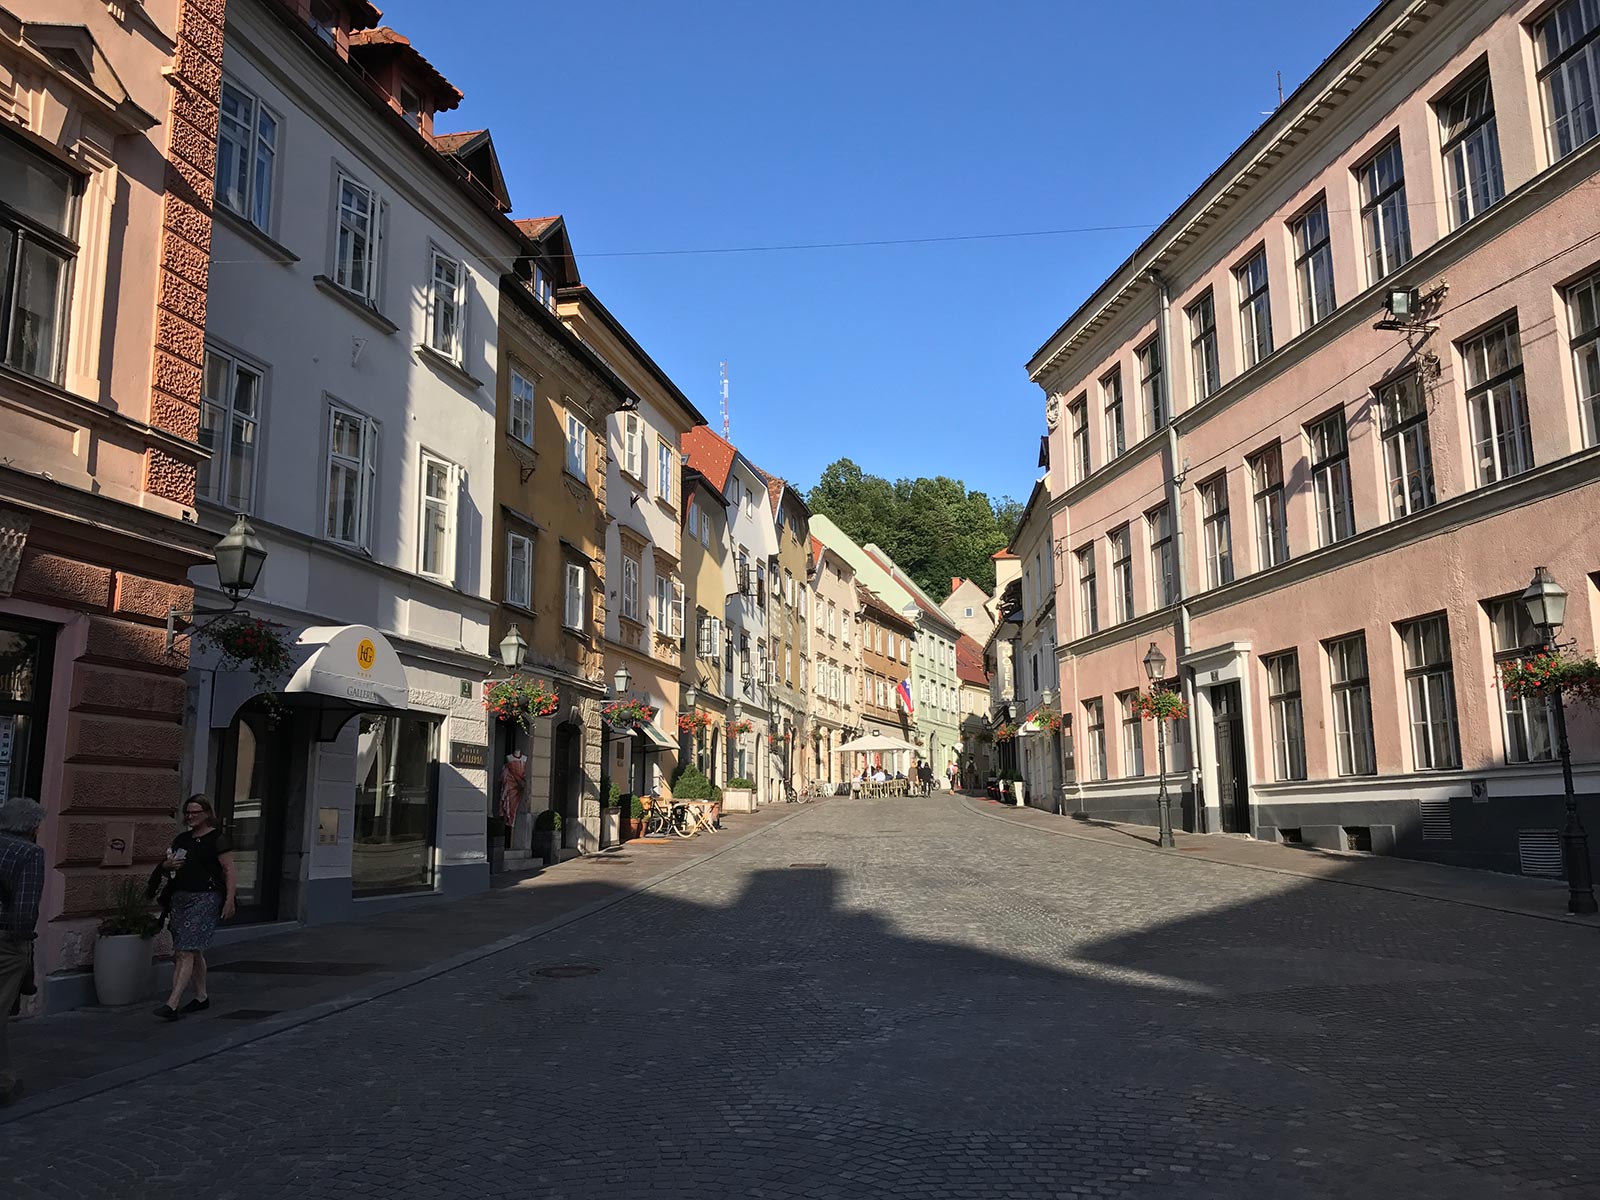 Quiet neighborhood in Ljubljana, Slovenia. The end of 2 years on the road; Slovenia, Luxembourg & Bruges